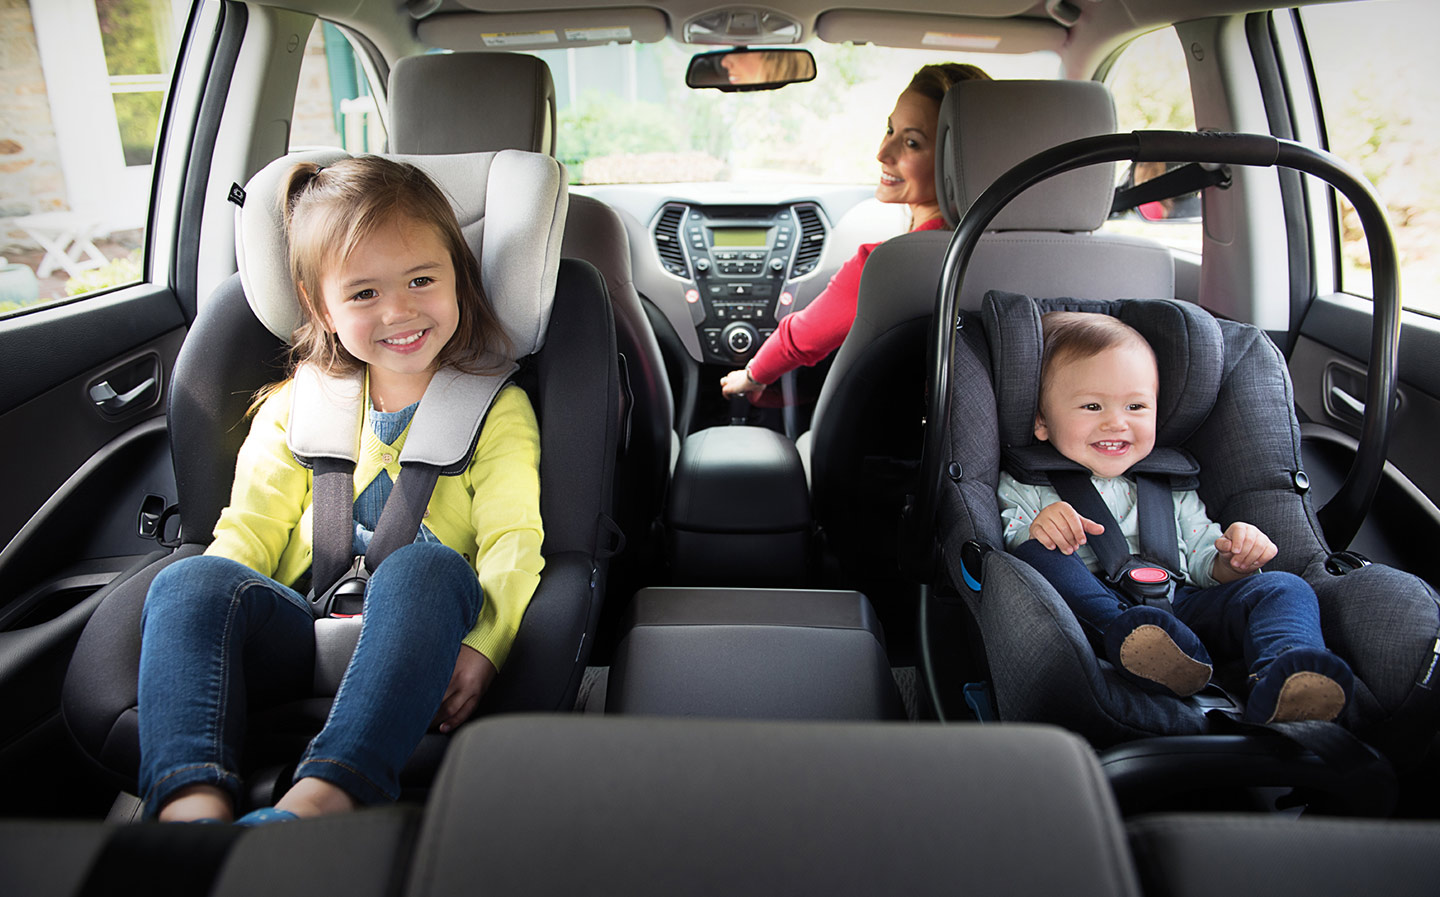 The Booster Seat: Safety on and Off The Road